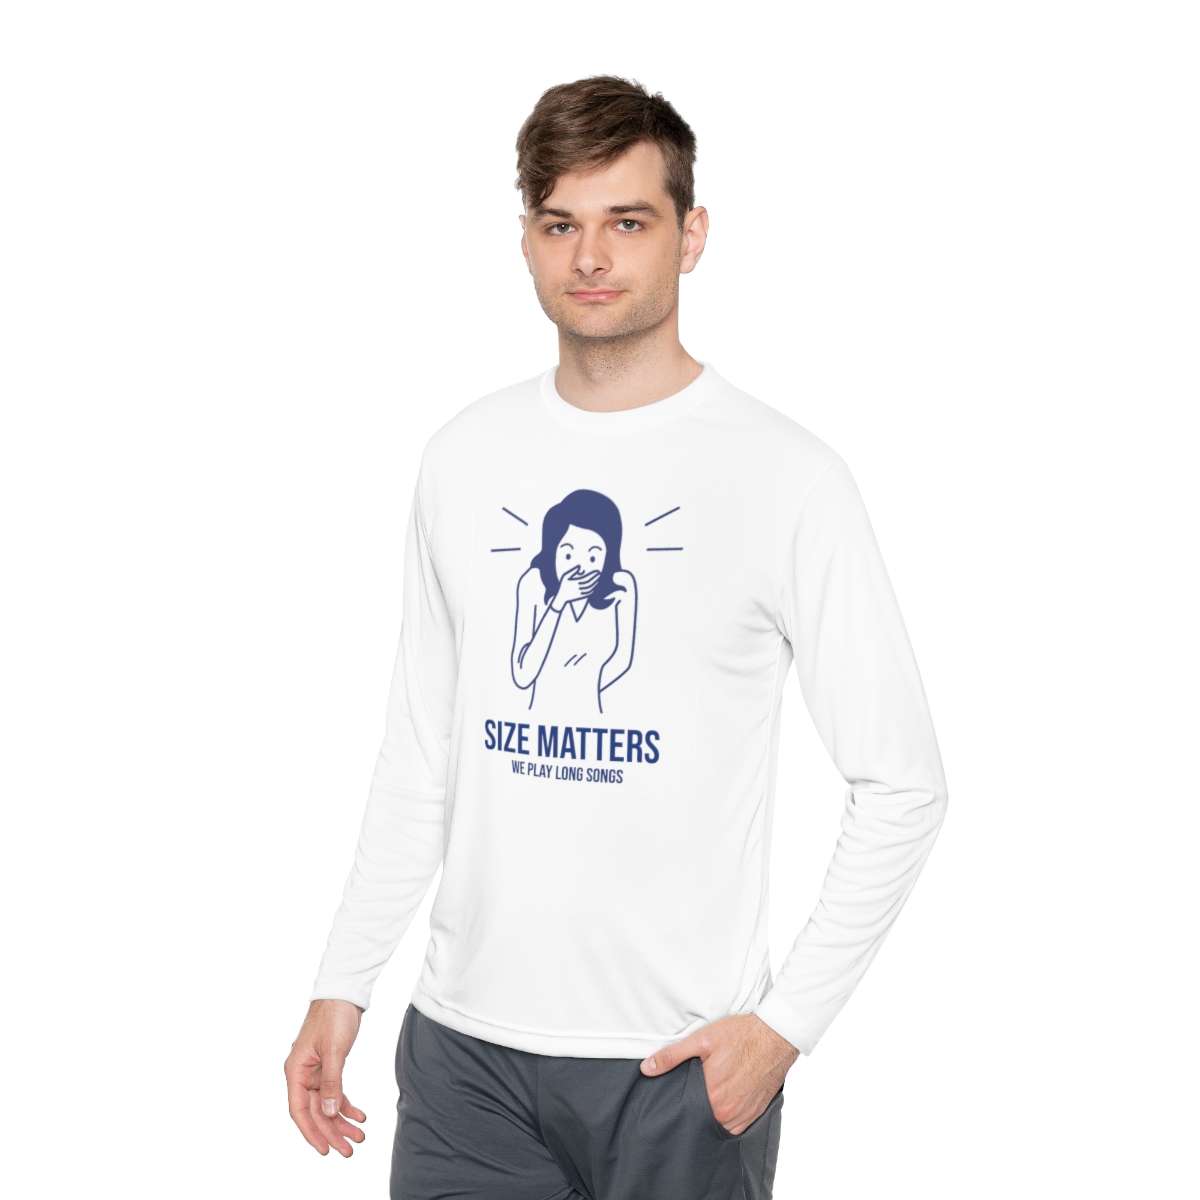 THE ZOO Lightweight Long Sleeve Tee "Size Matters" product thumbnail image